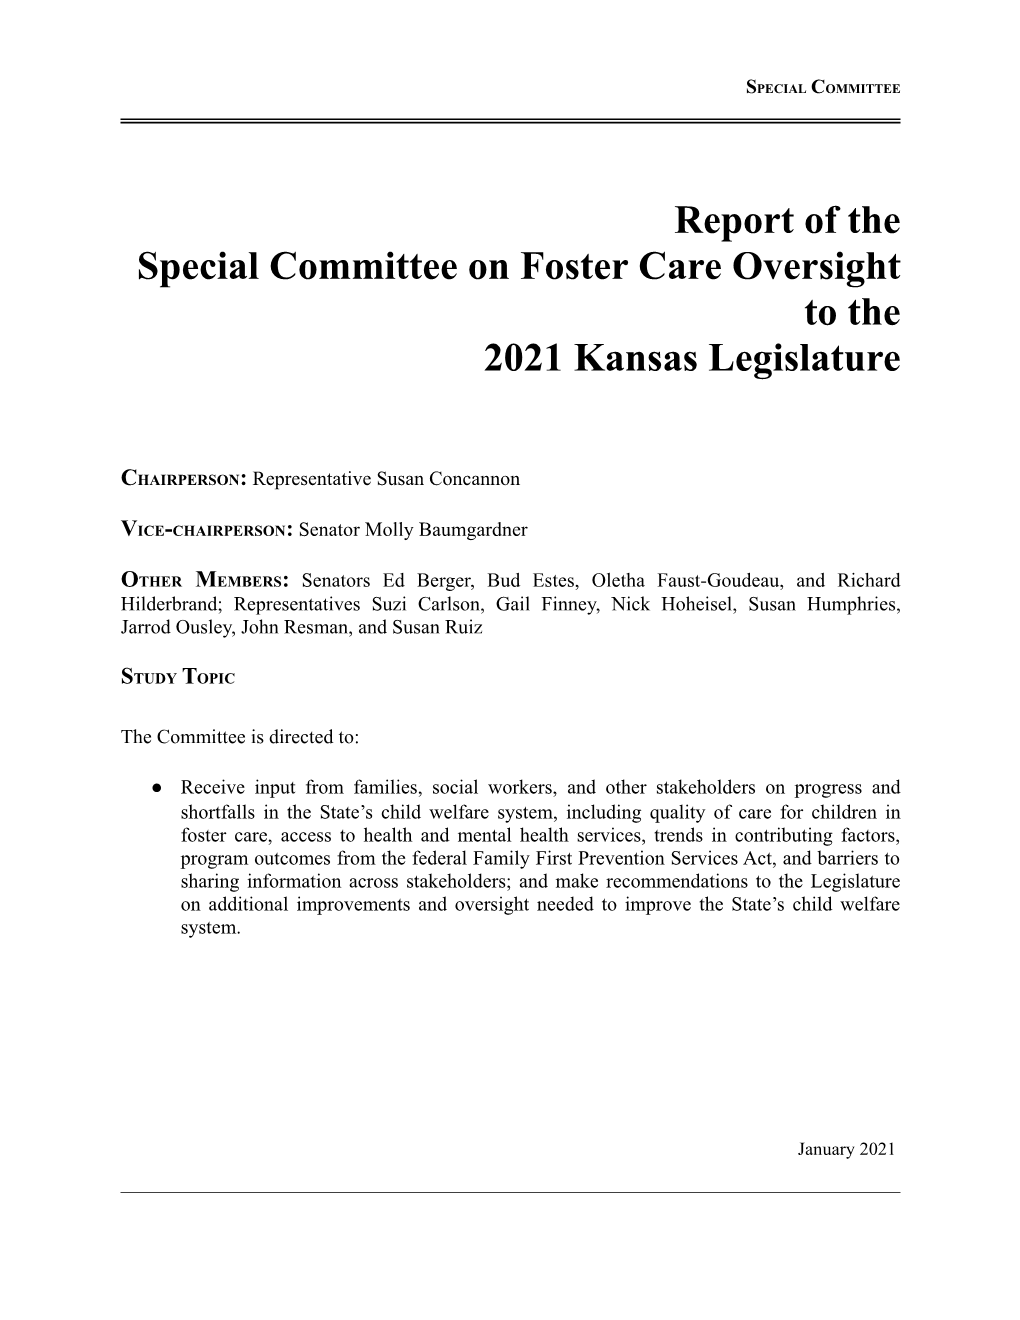 Special Committee on Foster Care Oversight to the 2021 Kansas Legislature